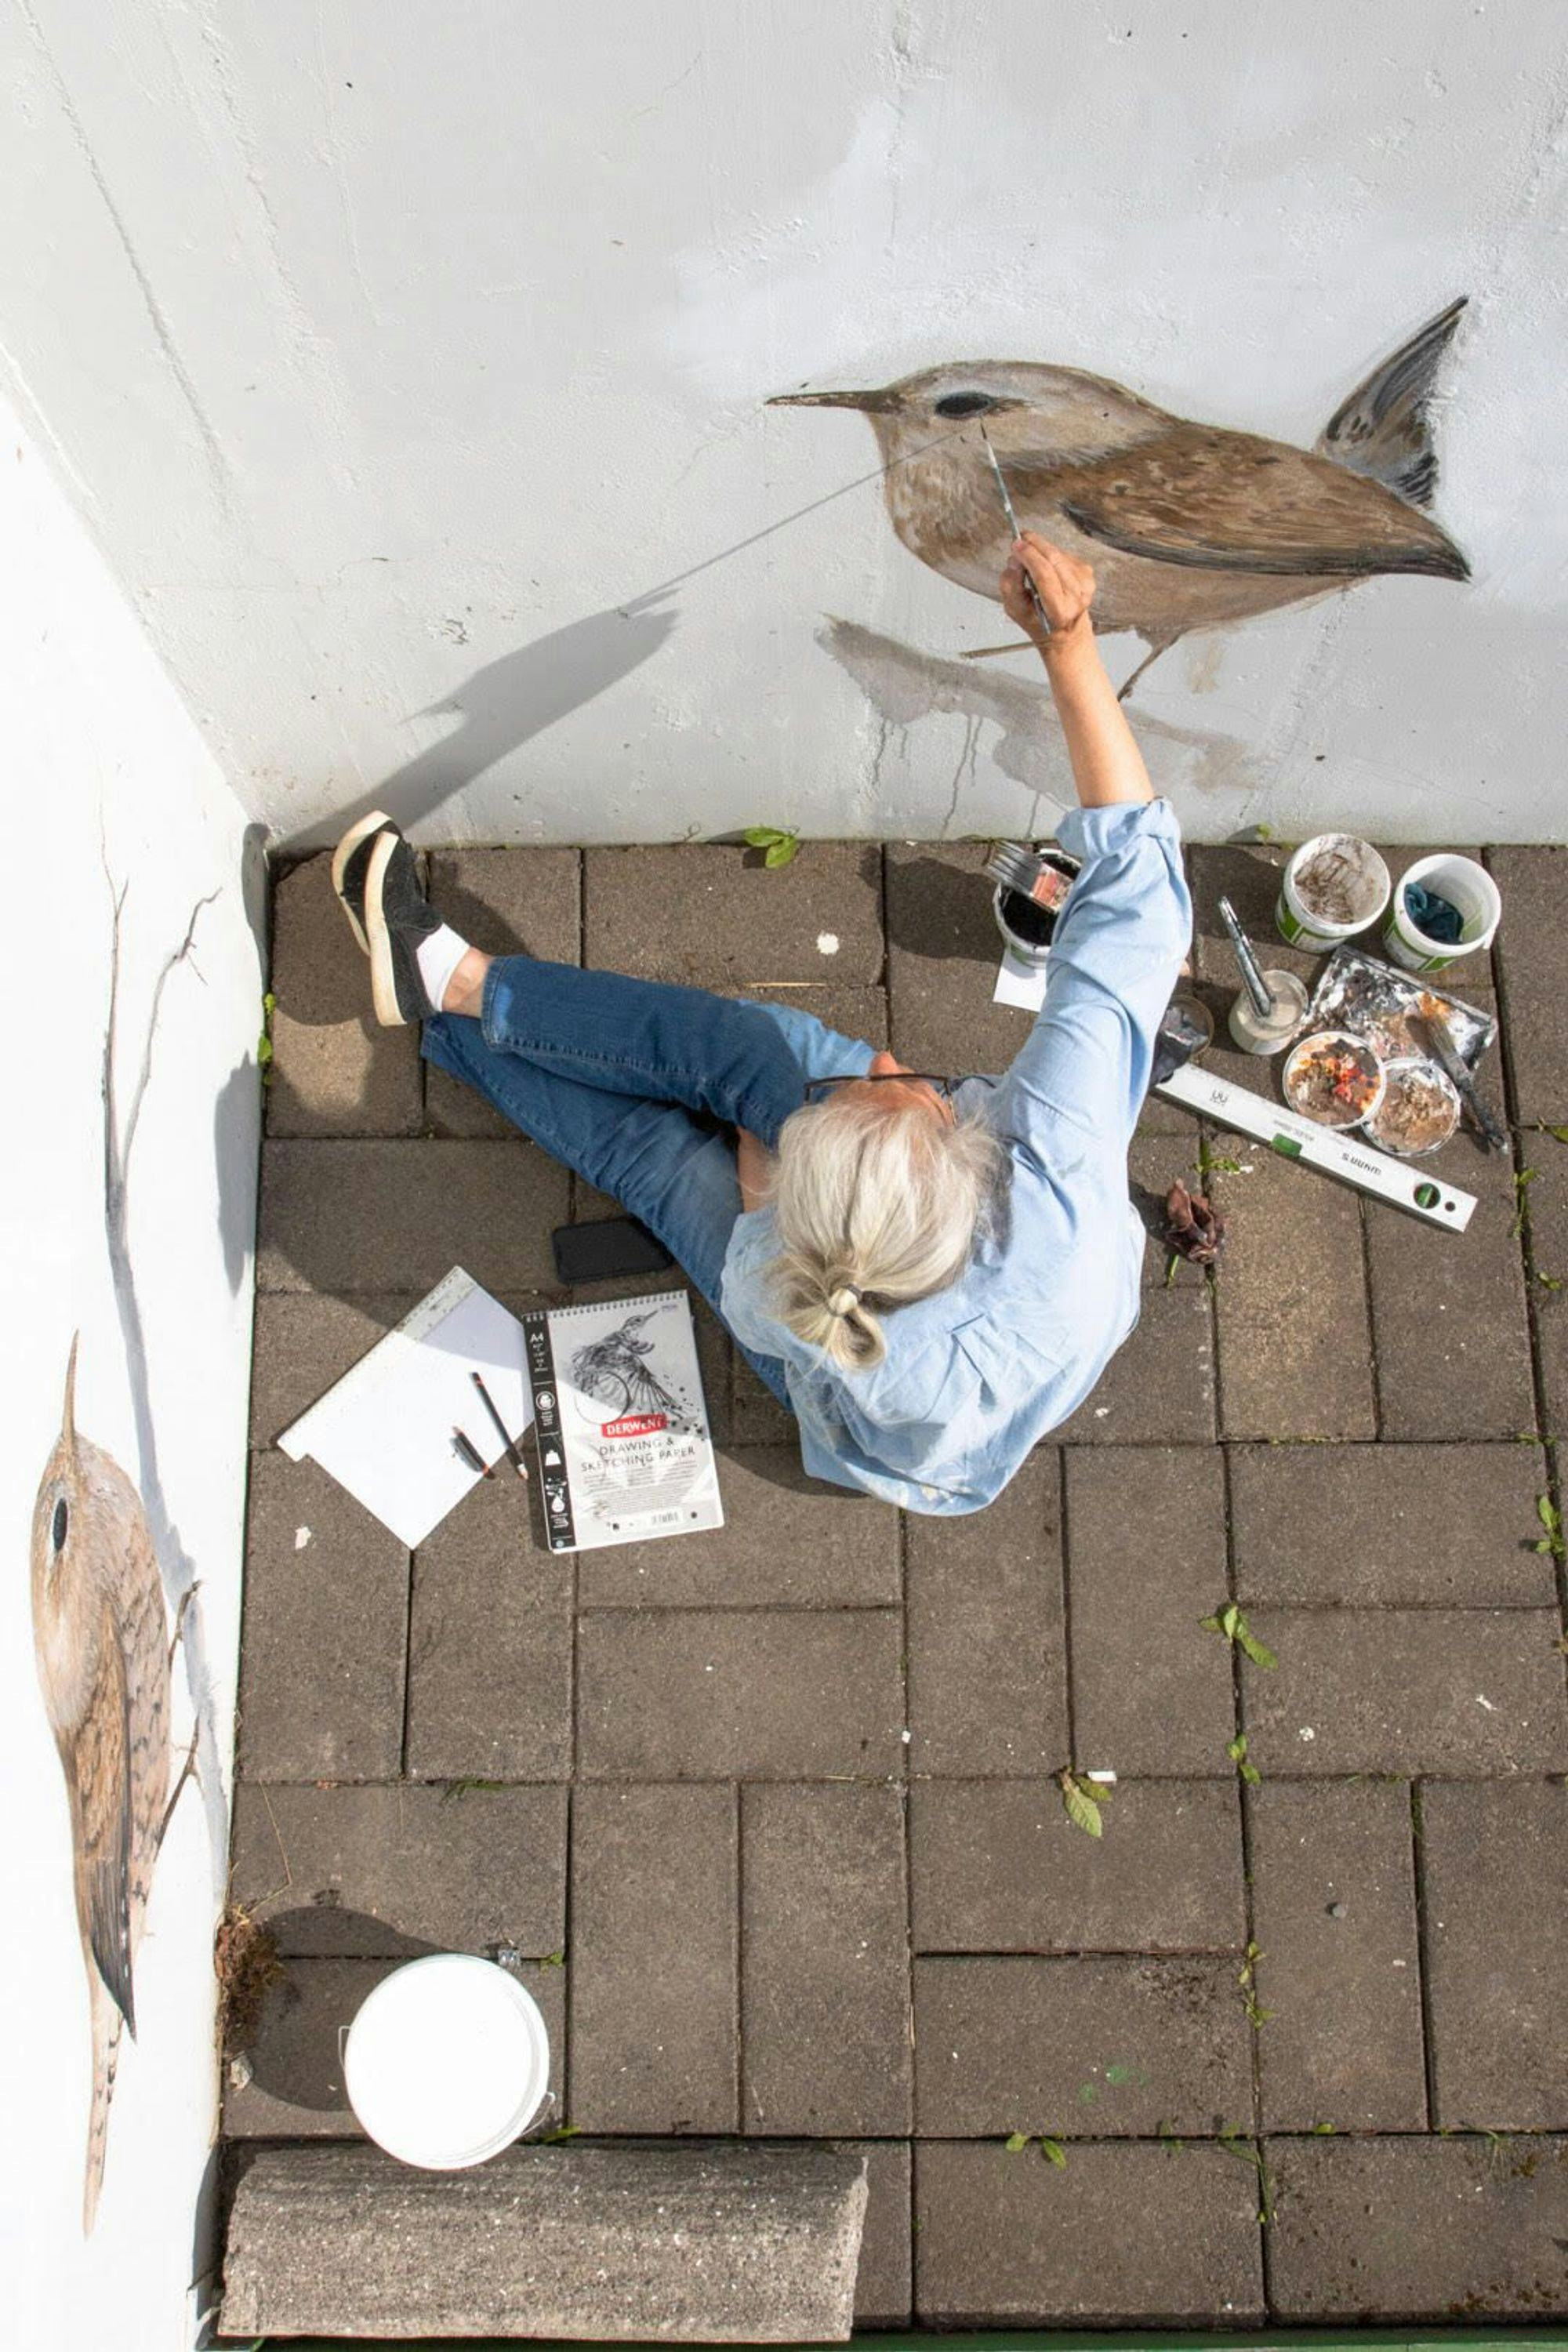 An individual sitting on a brick pavement with art supplies and canvas, viewed from above